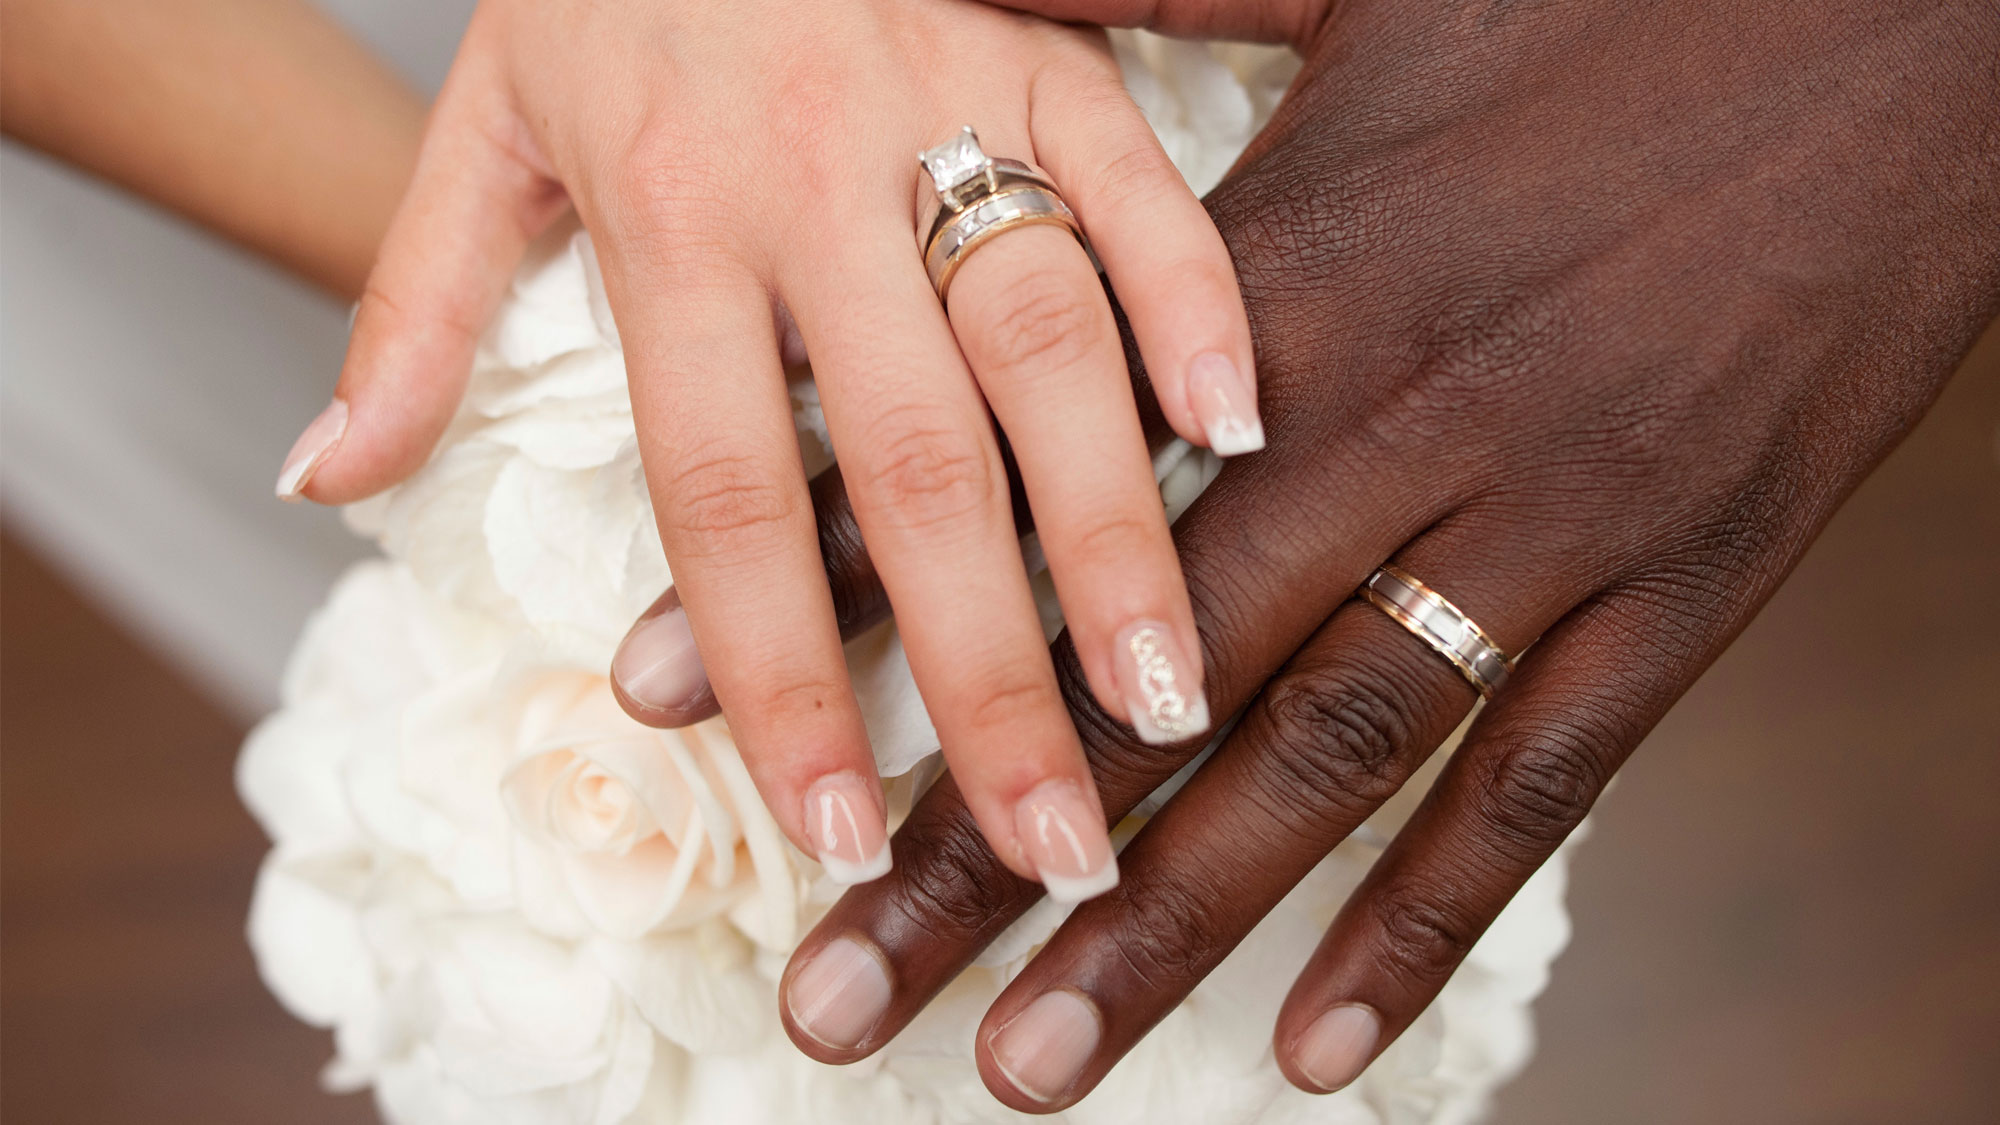 when did interracial marriage became legal in illinois